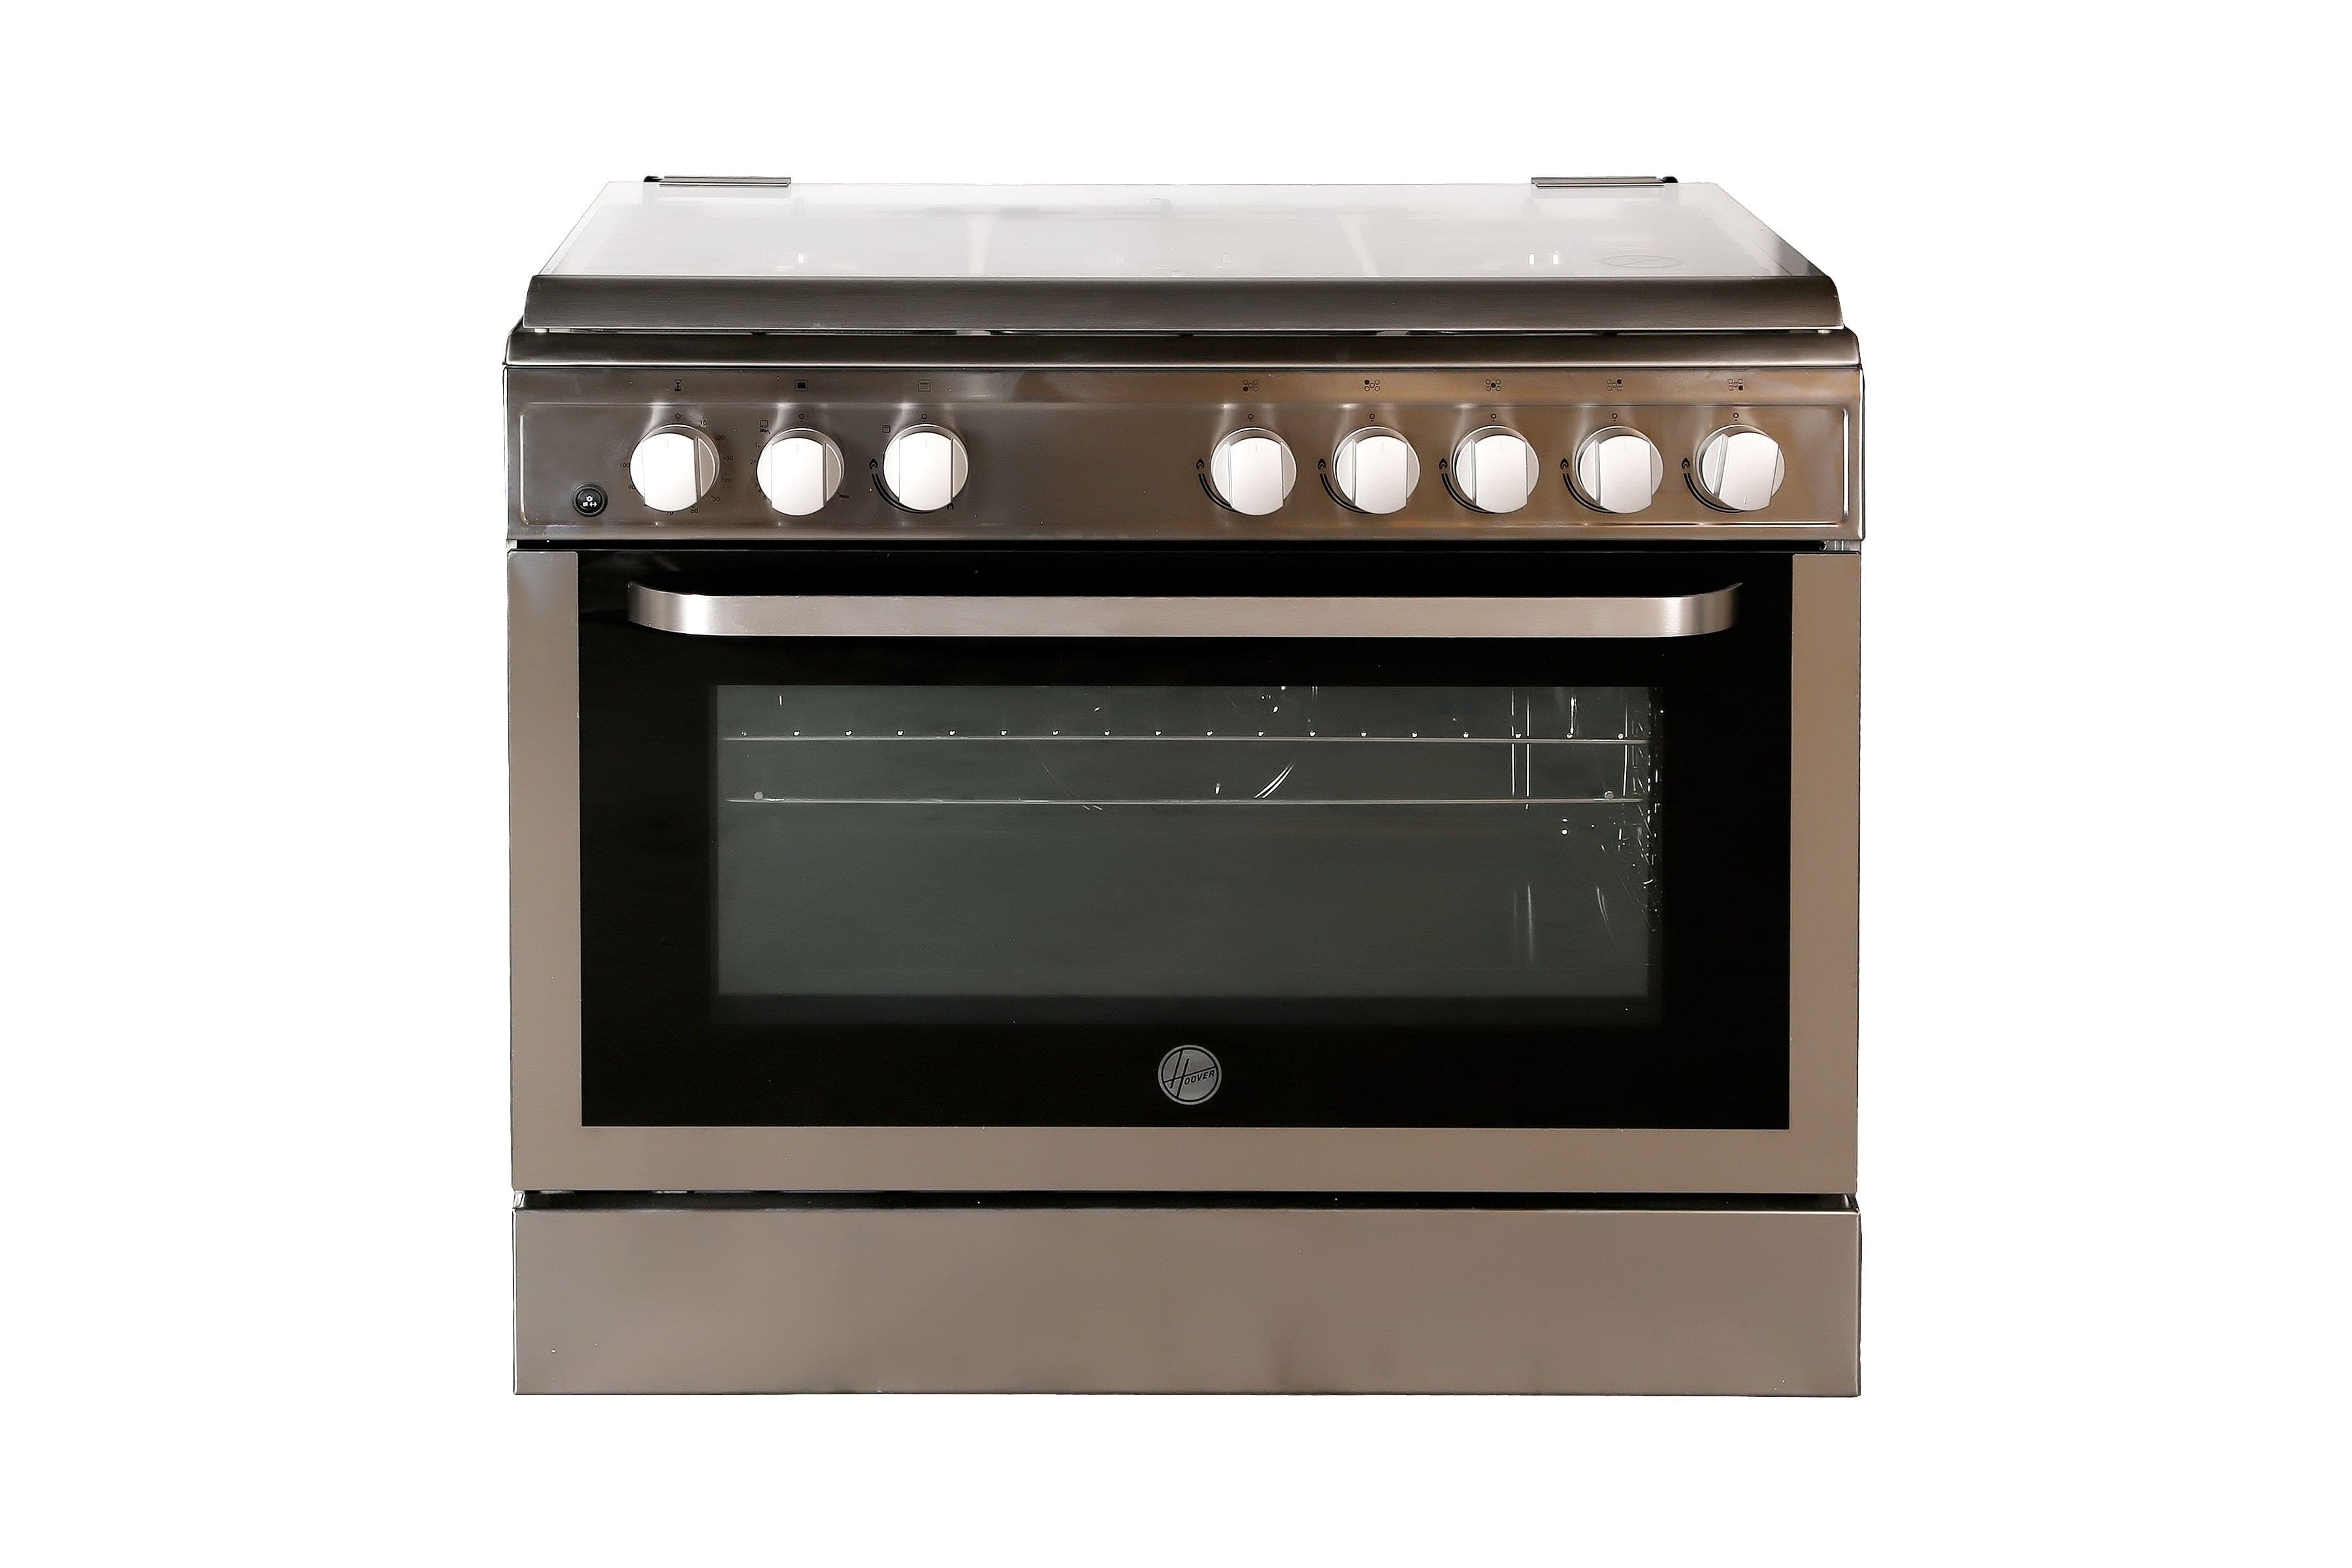 
Hoover 90 X 60 cm, 5 Burners Free Standing Gas Cooker, Silver - FGC9060-3DE